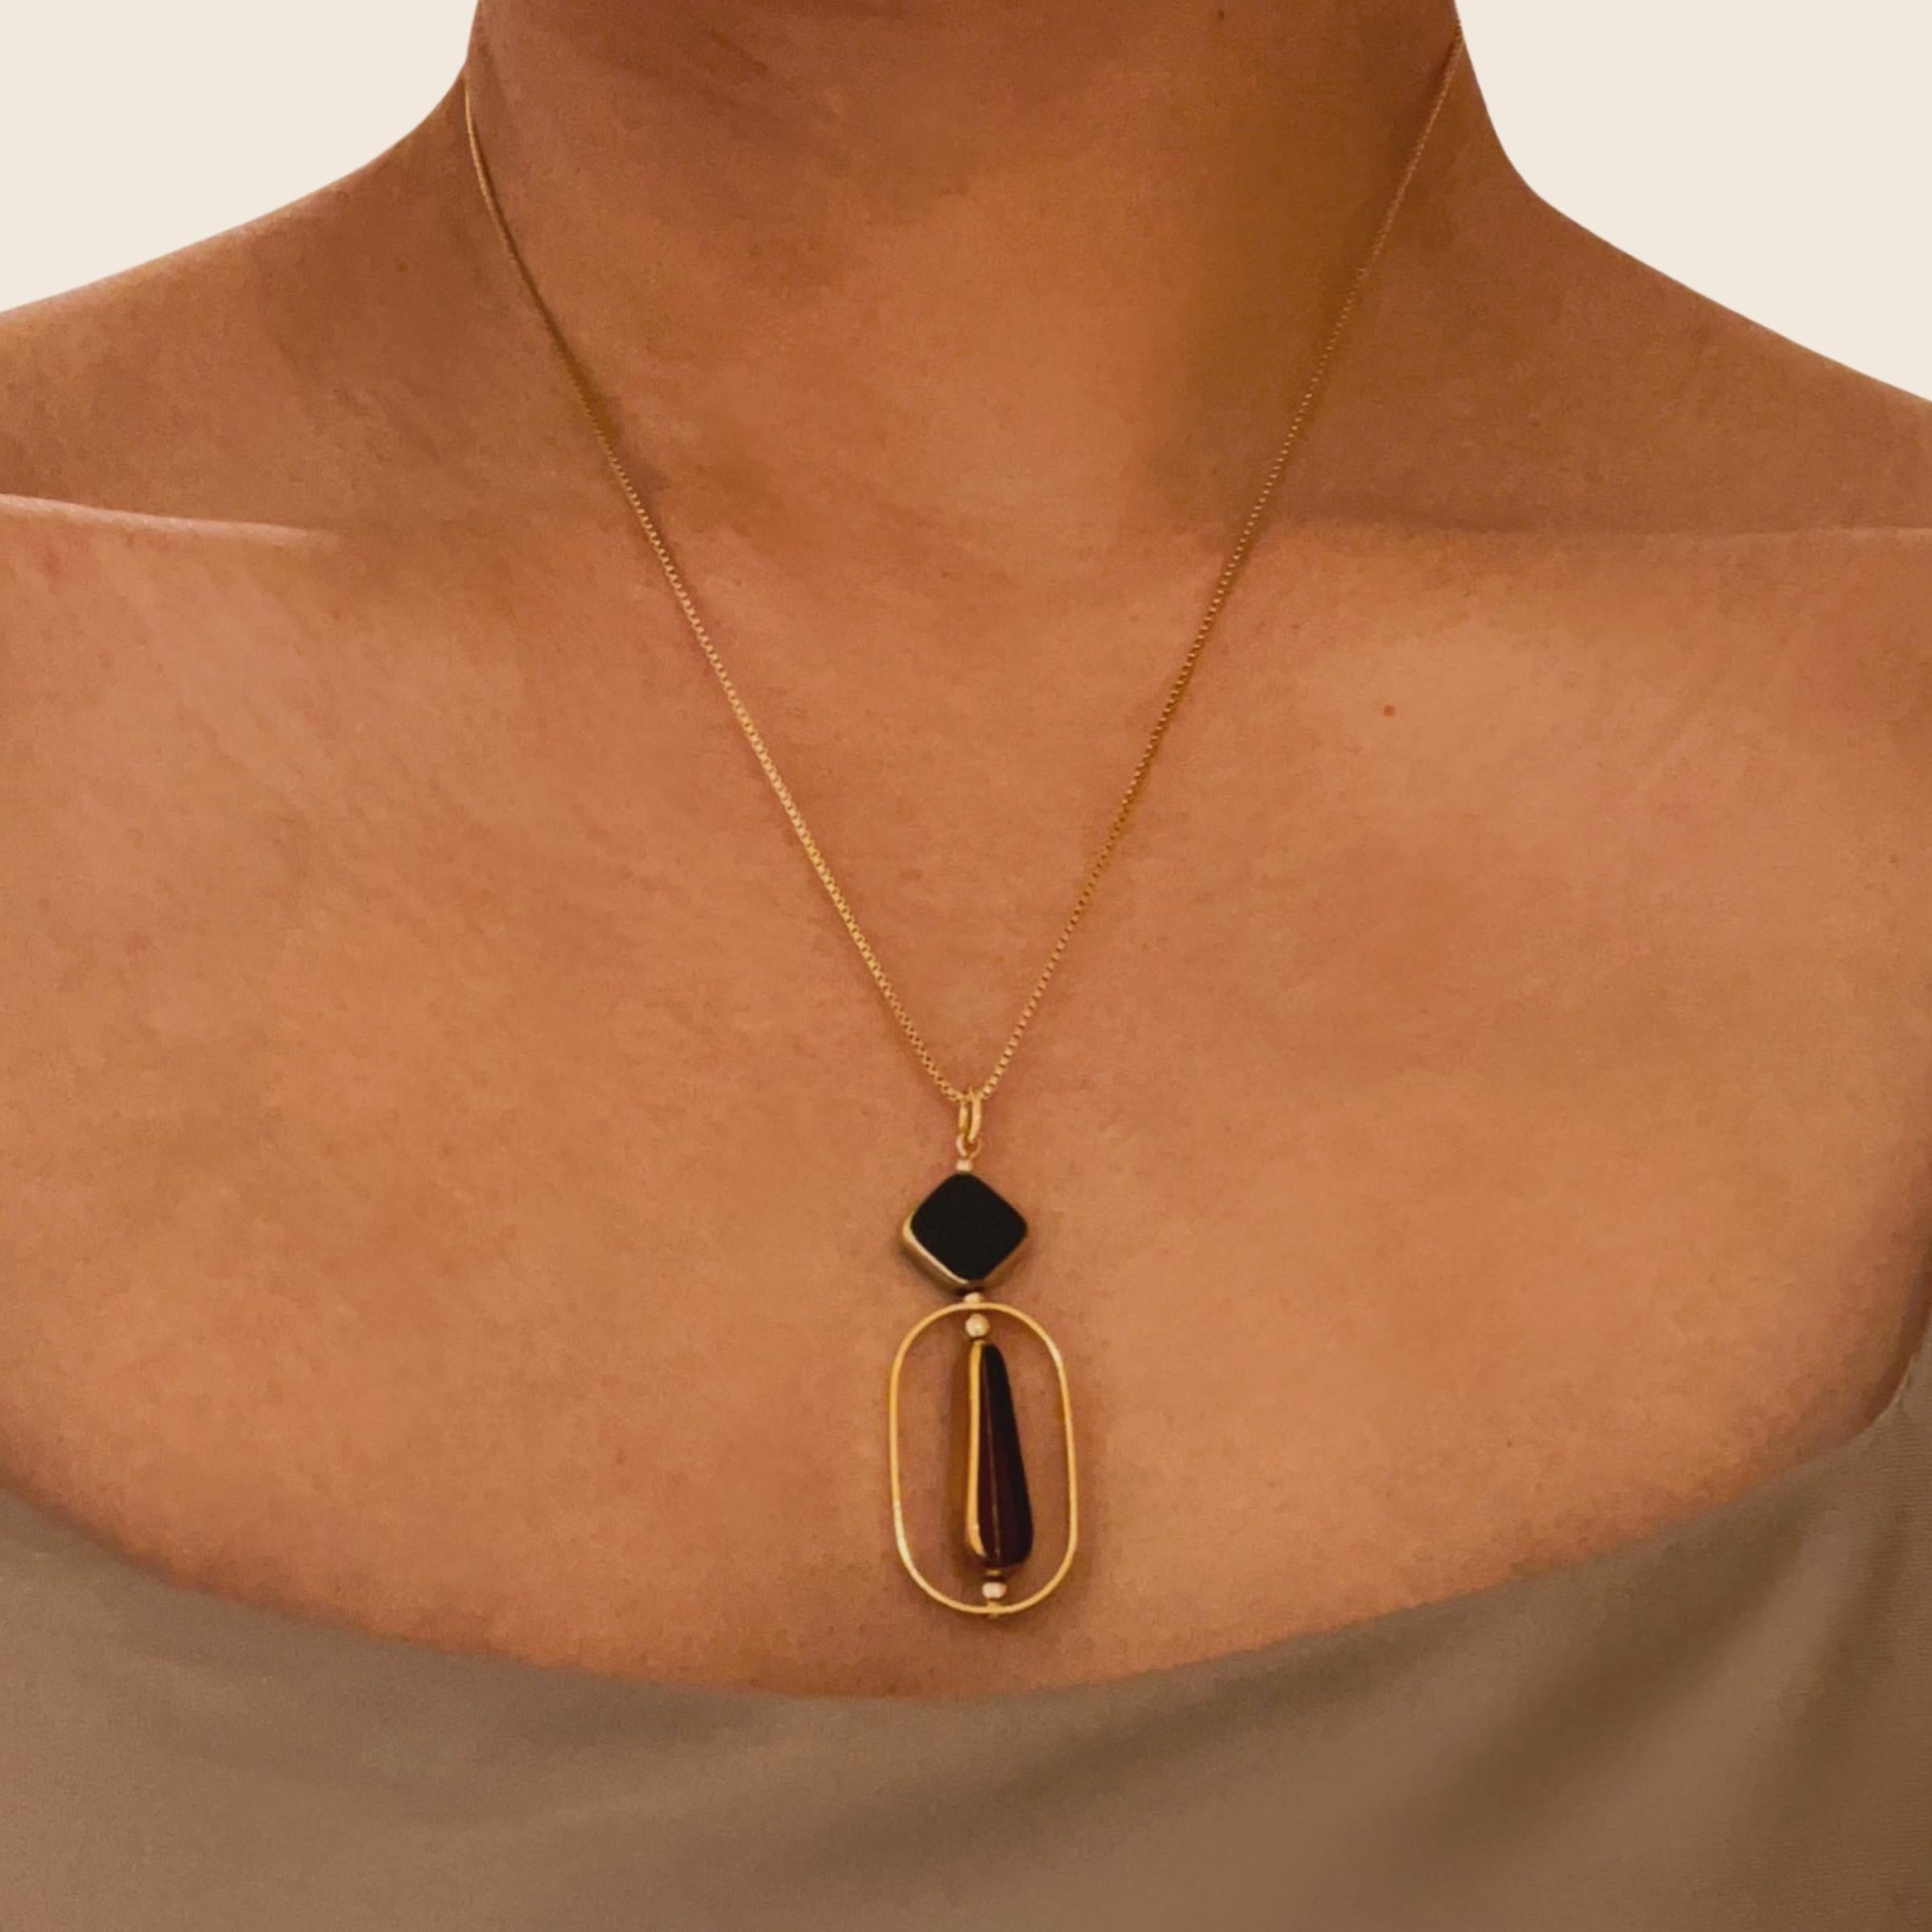 The pendant consist of a black diamond shaped beads and burgundy long teardrop vintage German glass beads and finished with a 18 inch gold filled chain.

The beads are new old stock vintage German glass beads that are framed with 24K gold. The beads